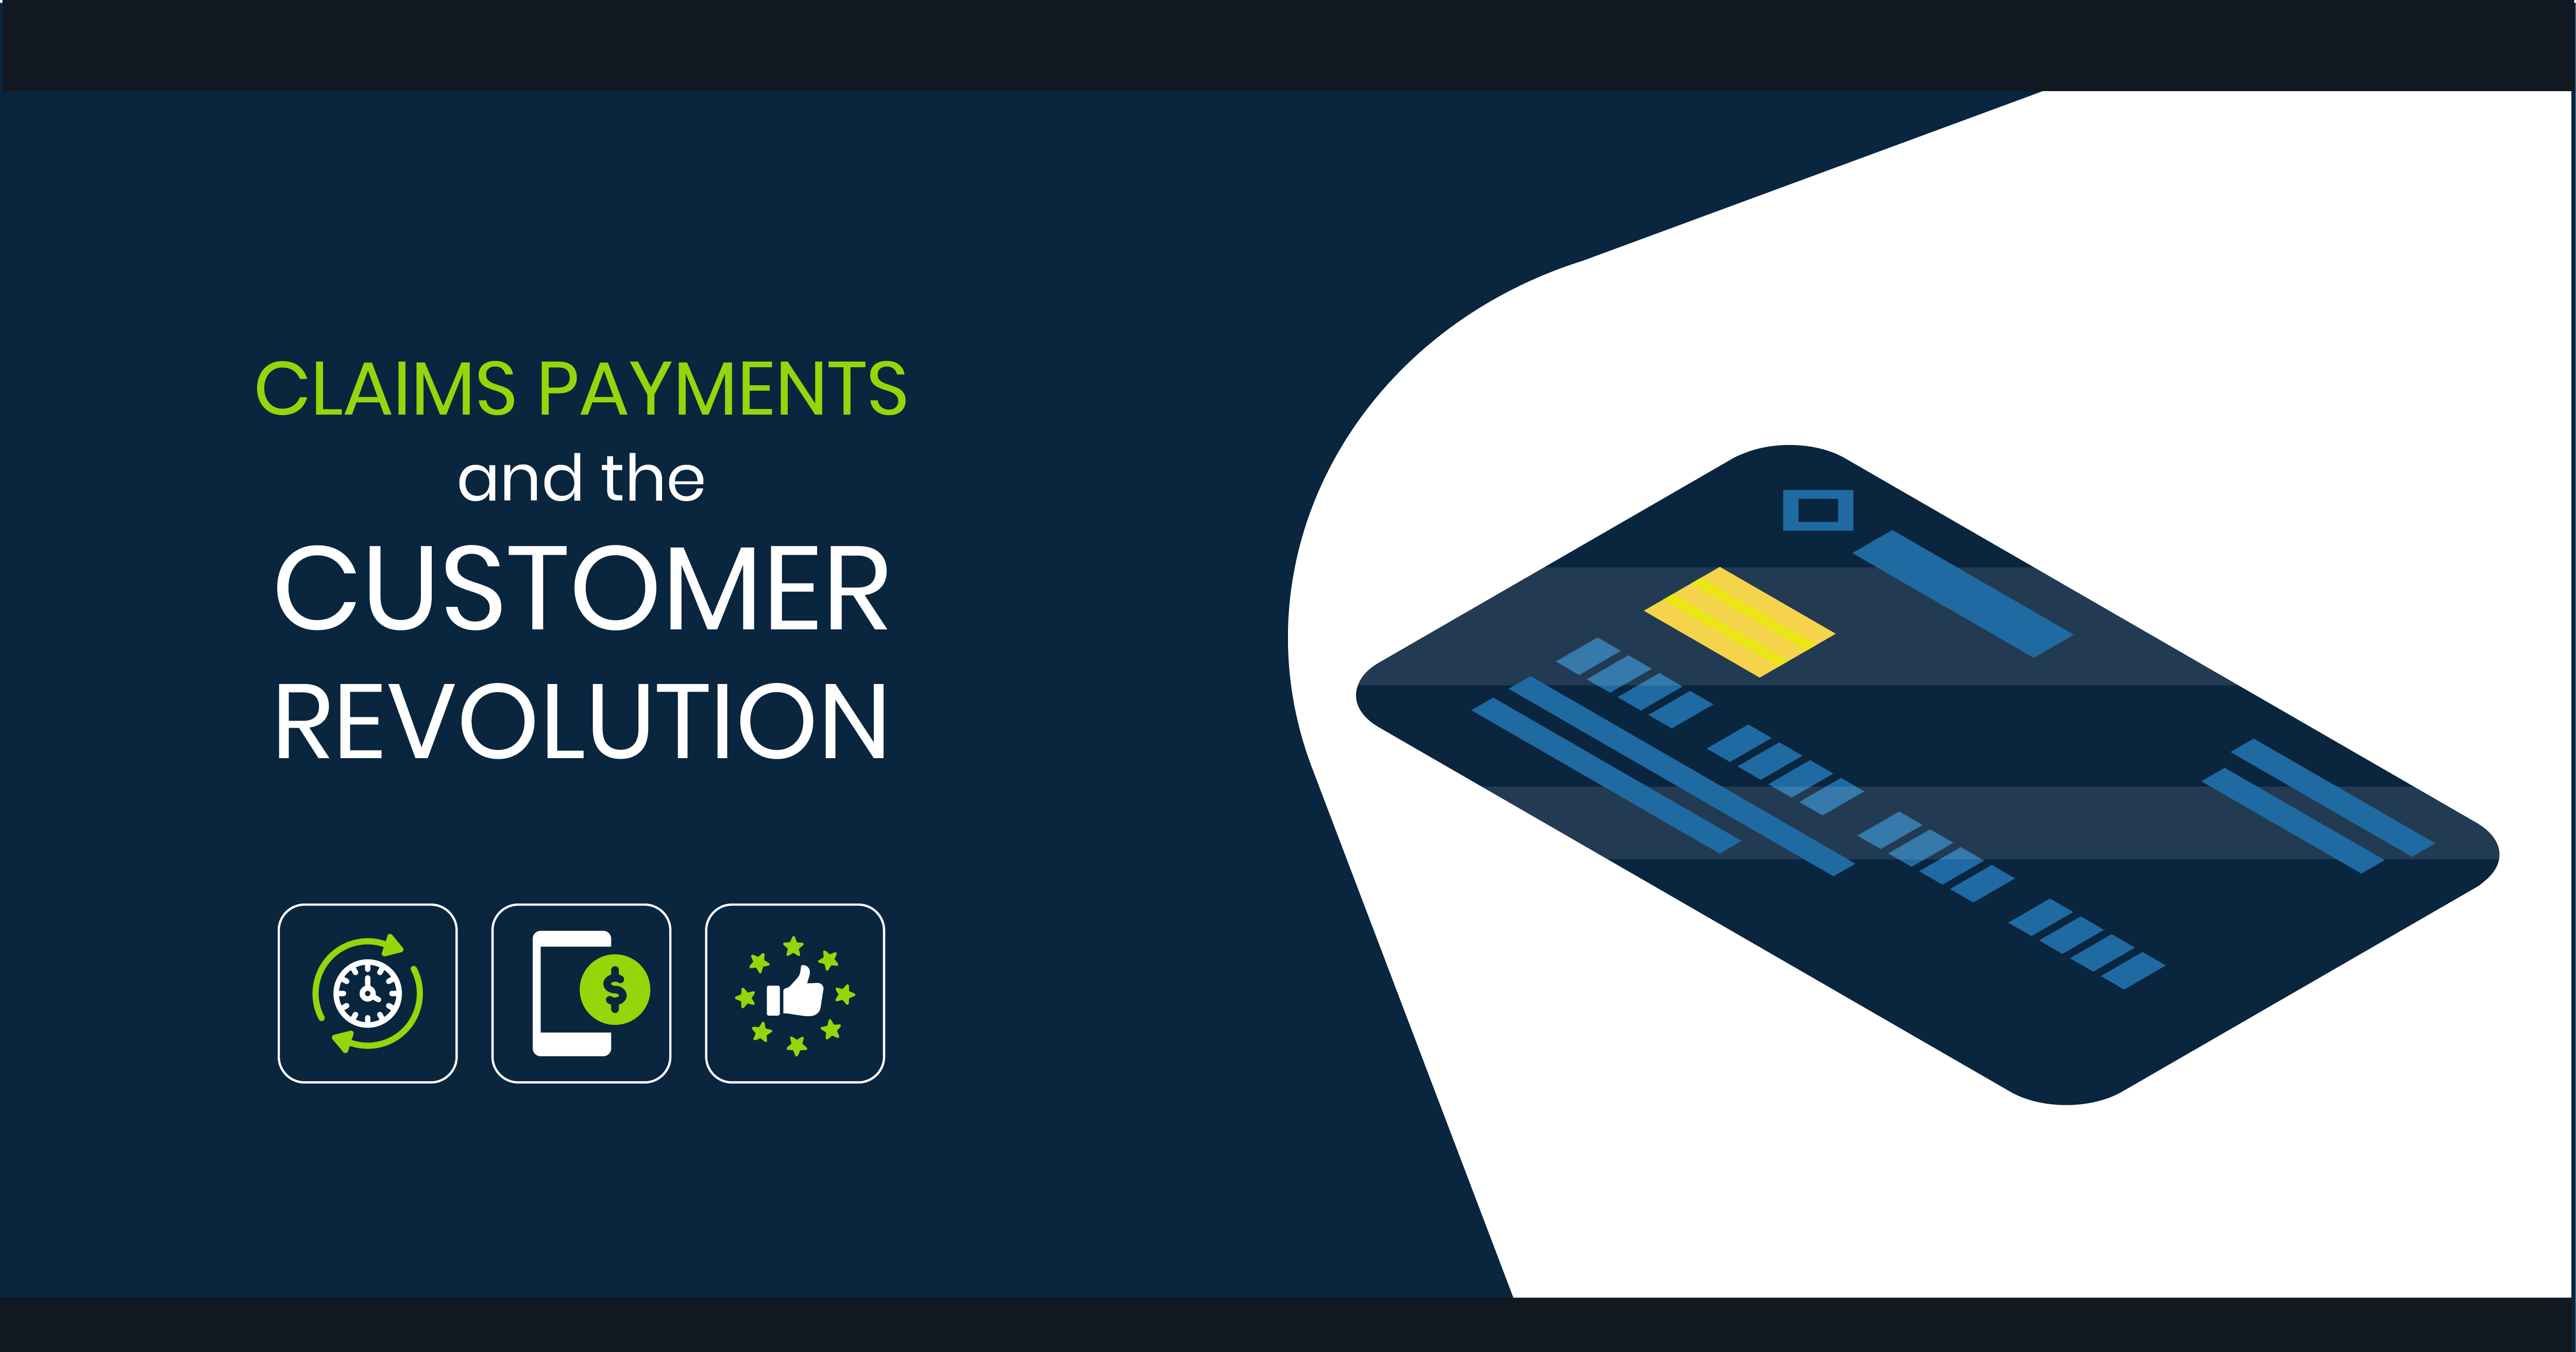 Claims Payments & The Customer Revolution Illustration